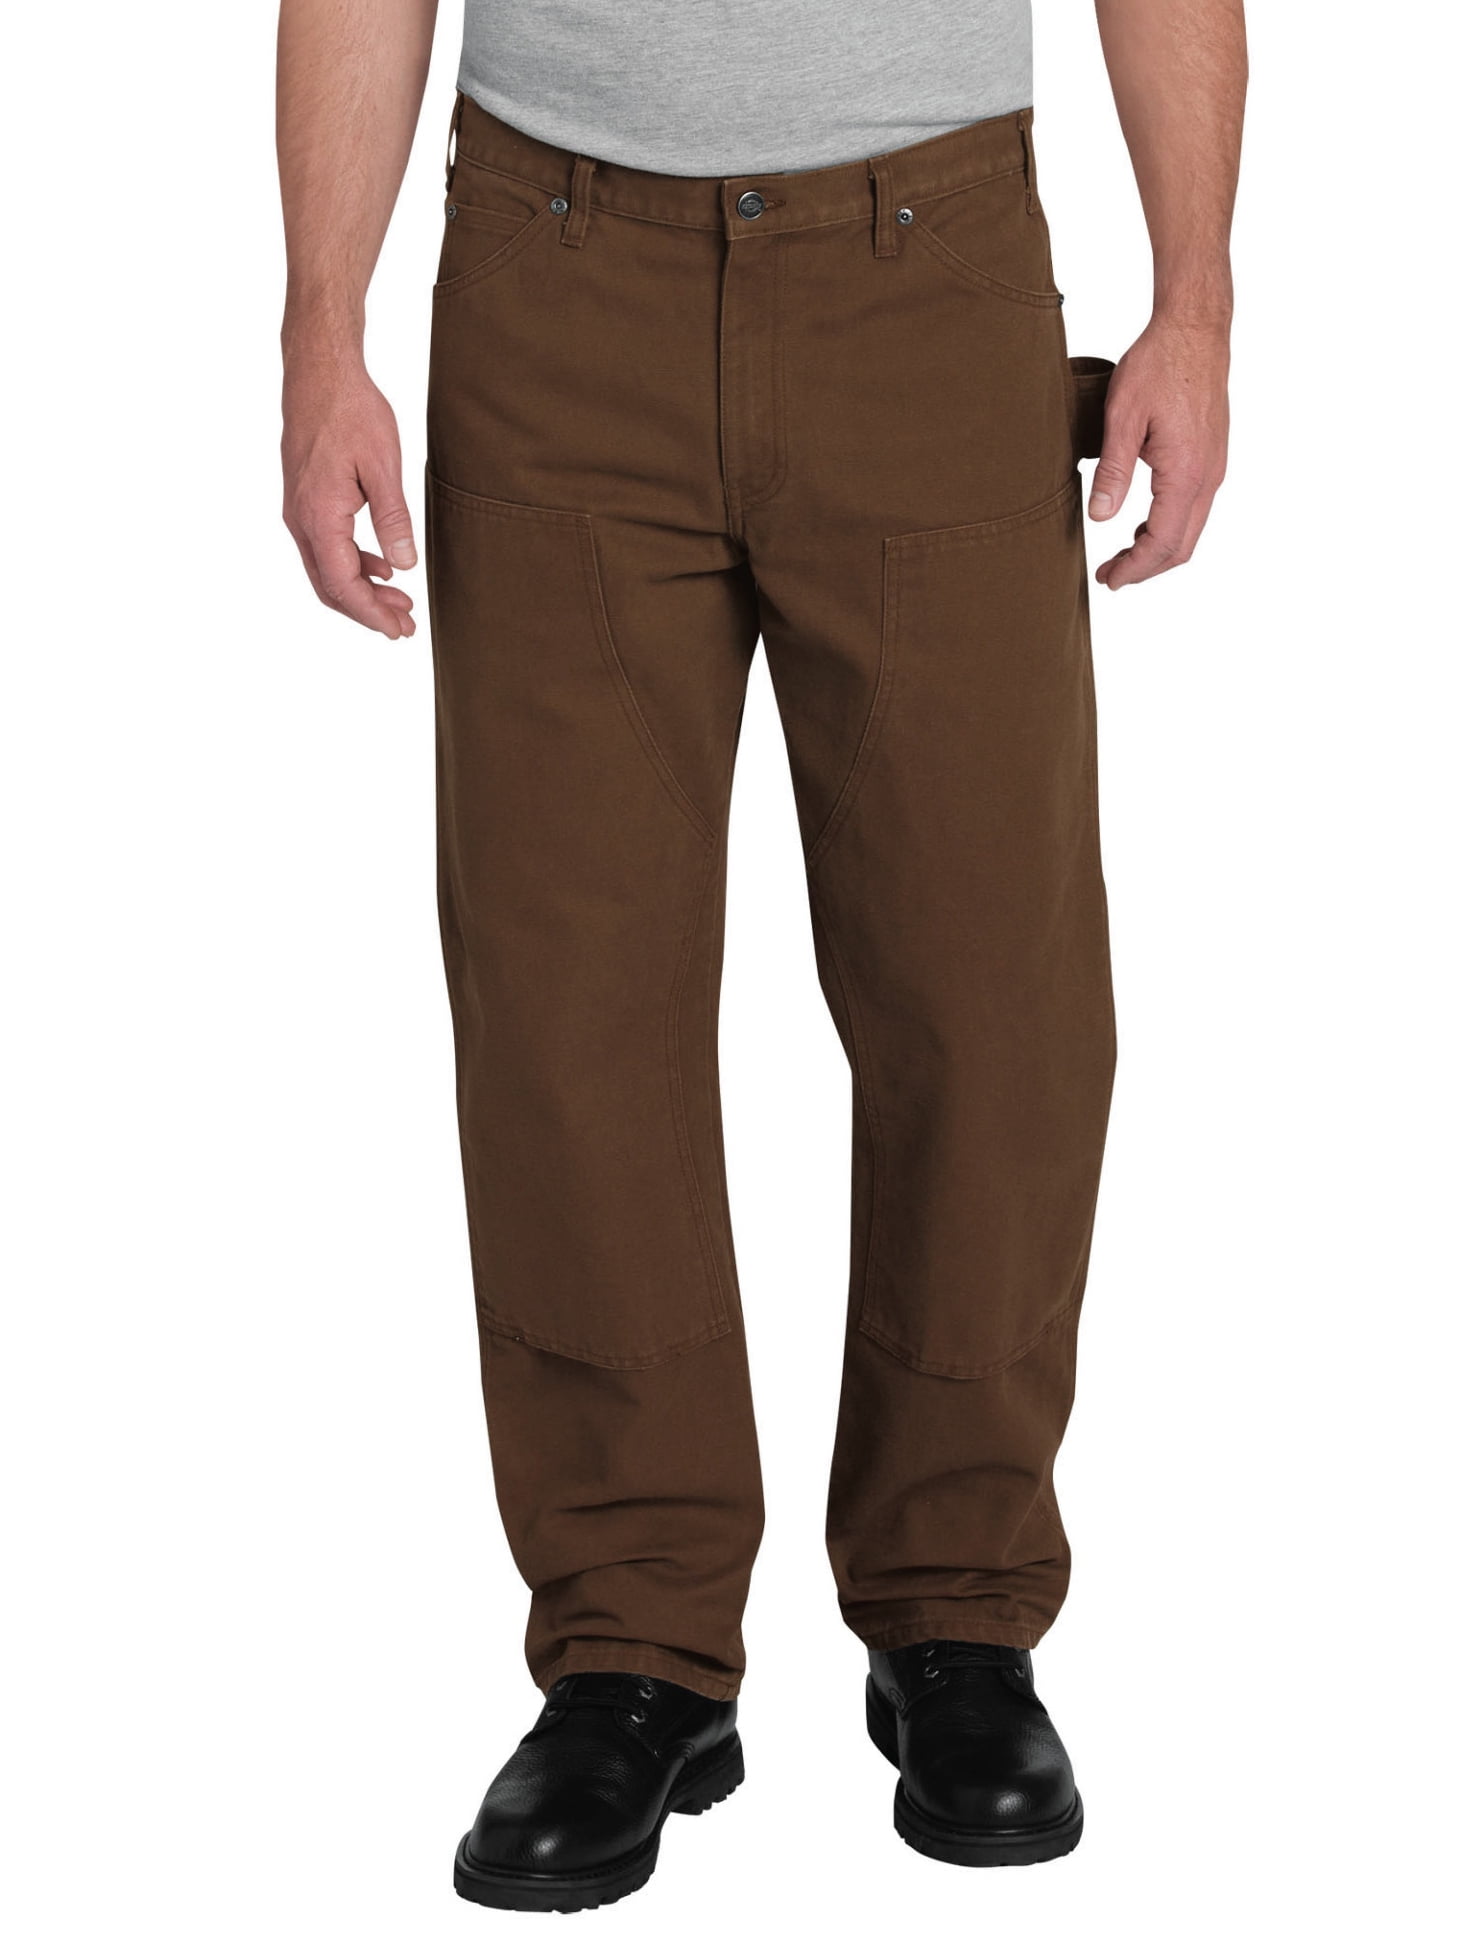 Men's Rugged Flex Relaxed Fit Duck Utility Work Pant - Black - Ramsey  Outdoor